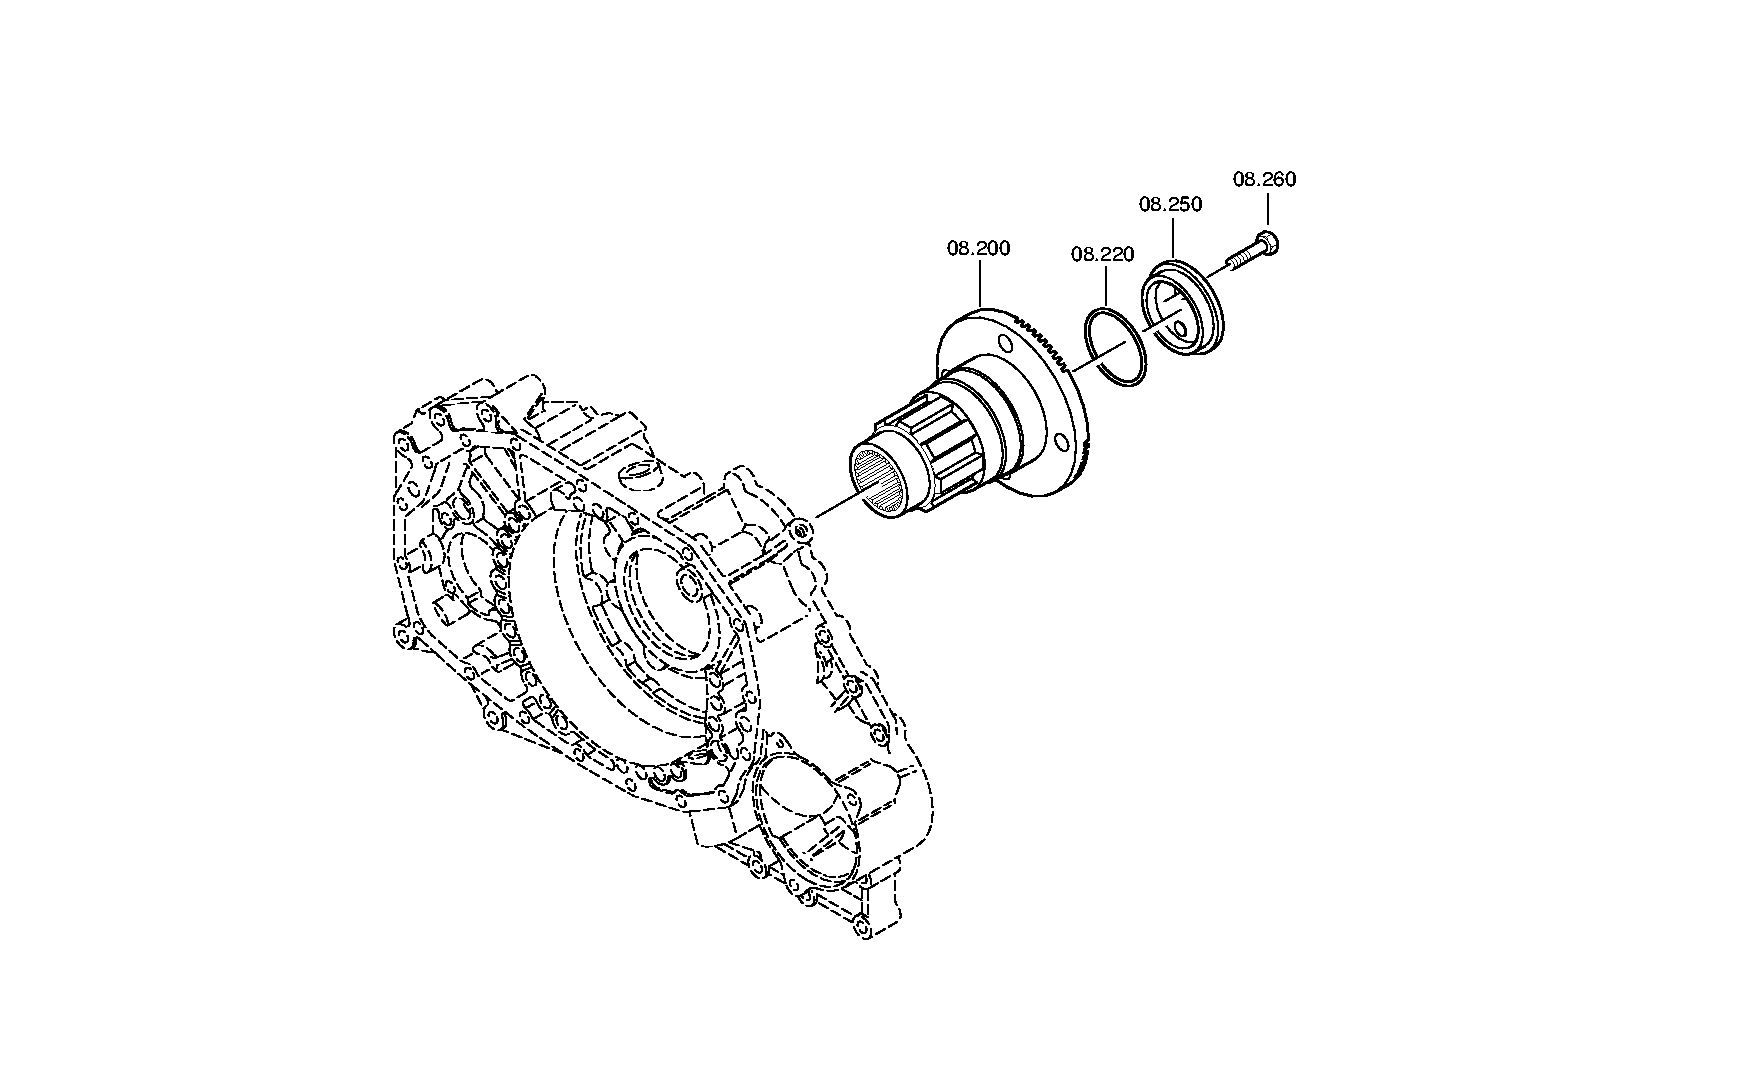 drawing for VOITH-GETRIEBE KG 1900038006370 - HEXAGON SCREW (figure 5)